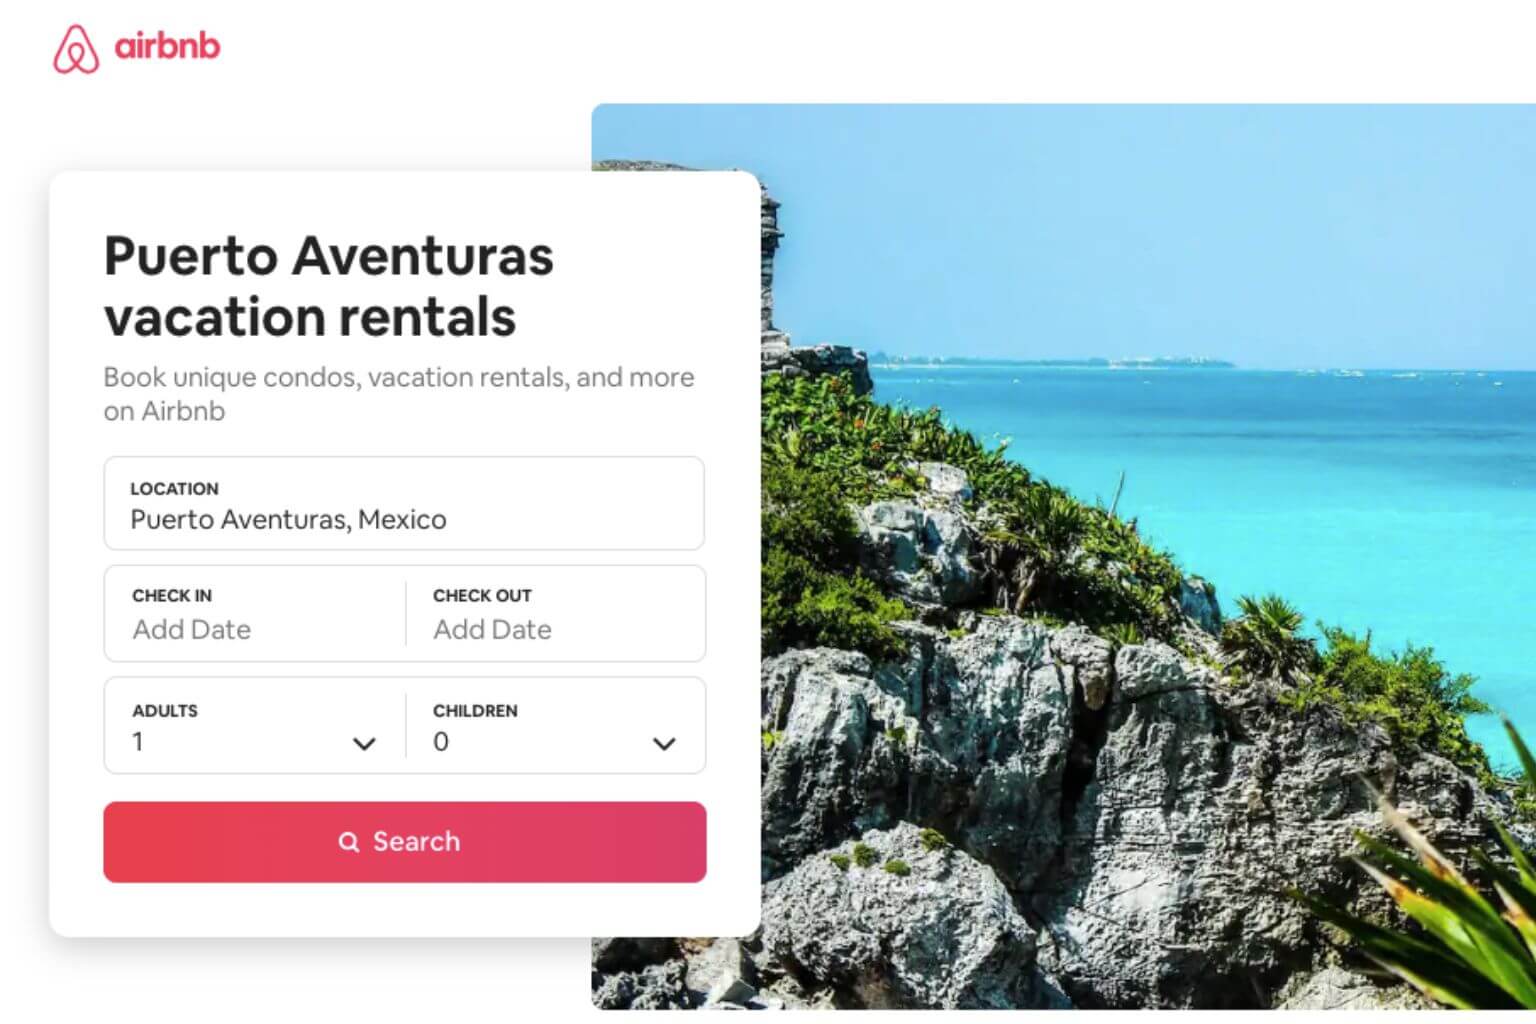 Airbnb Vacation Rental Website home page